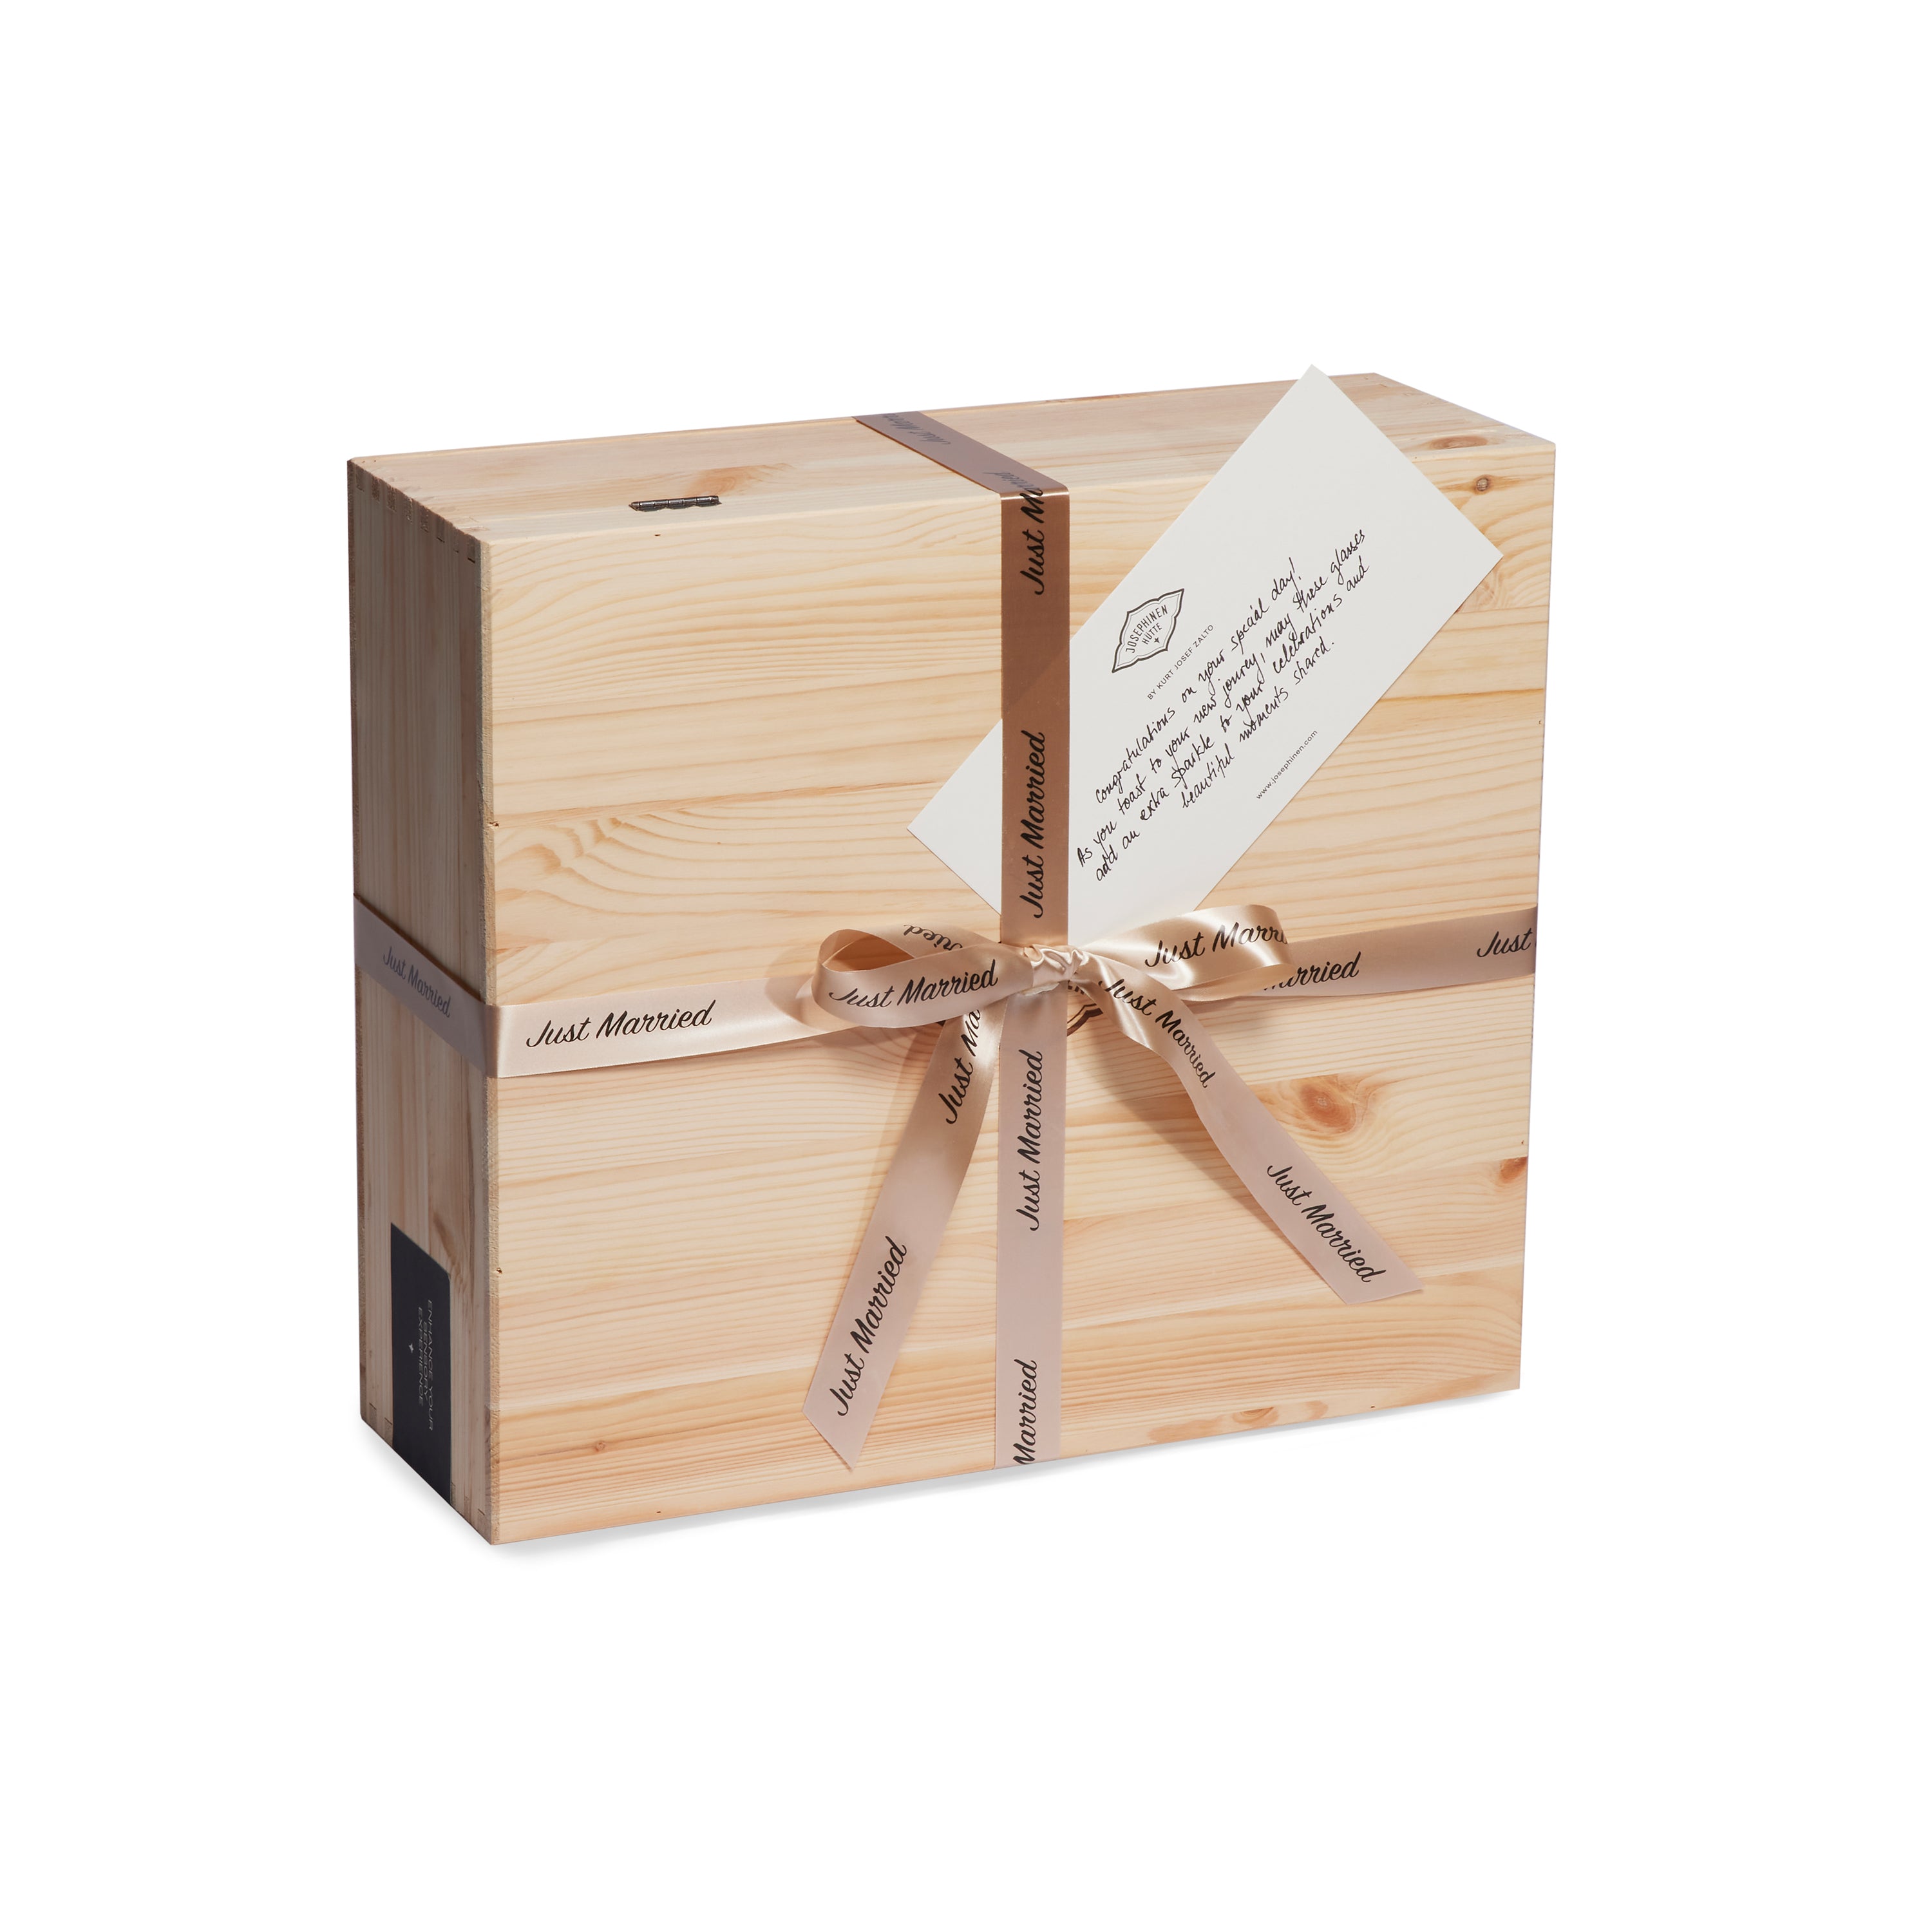 A Josephinenhütte wedding gift box, beautifully wrapped with a "Just Married" ribbon and a card attached. The wooden box exudes a rustic charm, perfect for a wedding gift. Inside are two JOSEPHINE No 4 champagne glasses.